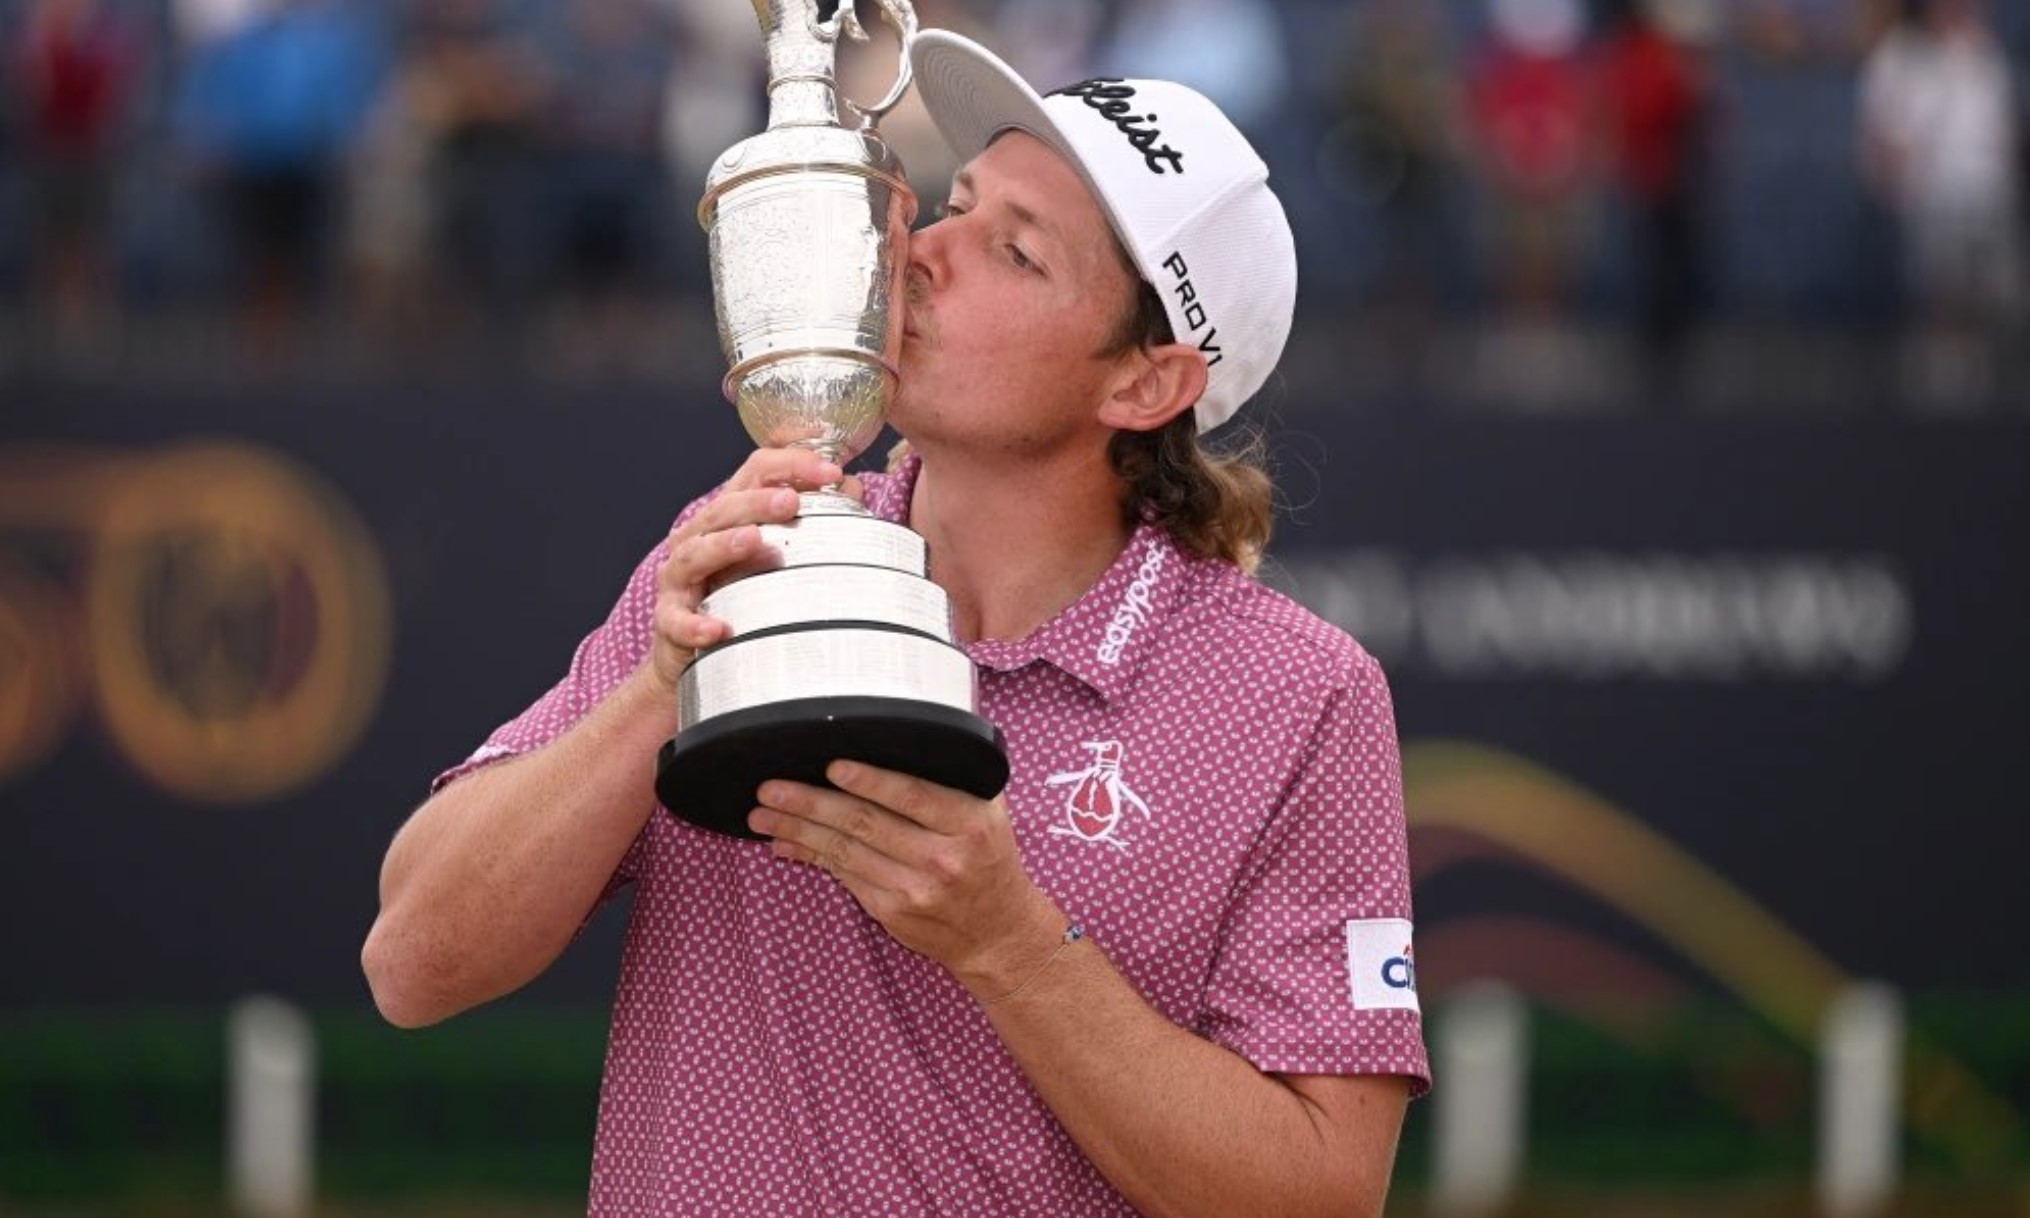 Cameron Smith wins the Claret Jug in a 'spectacular' win